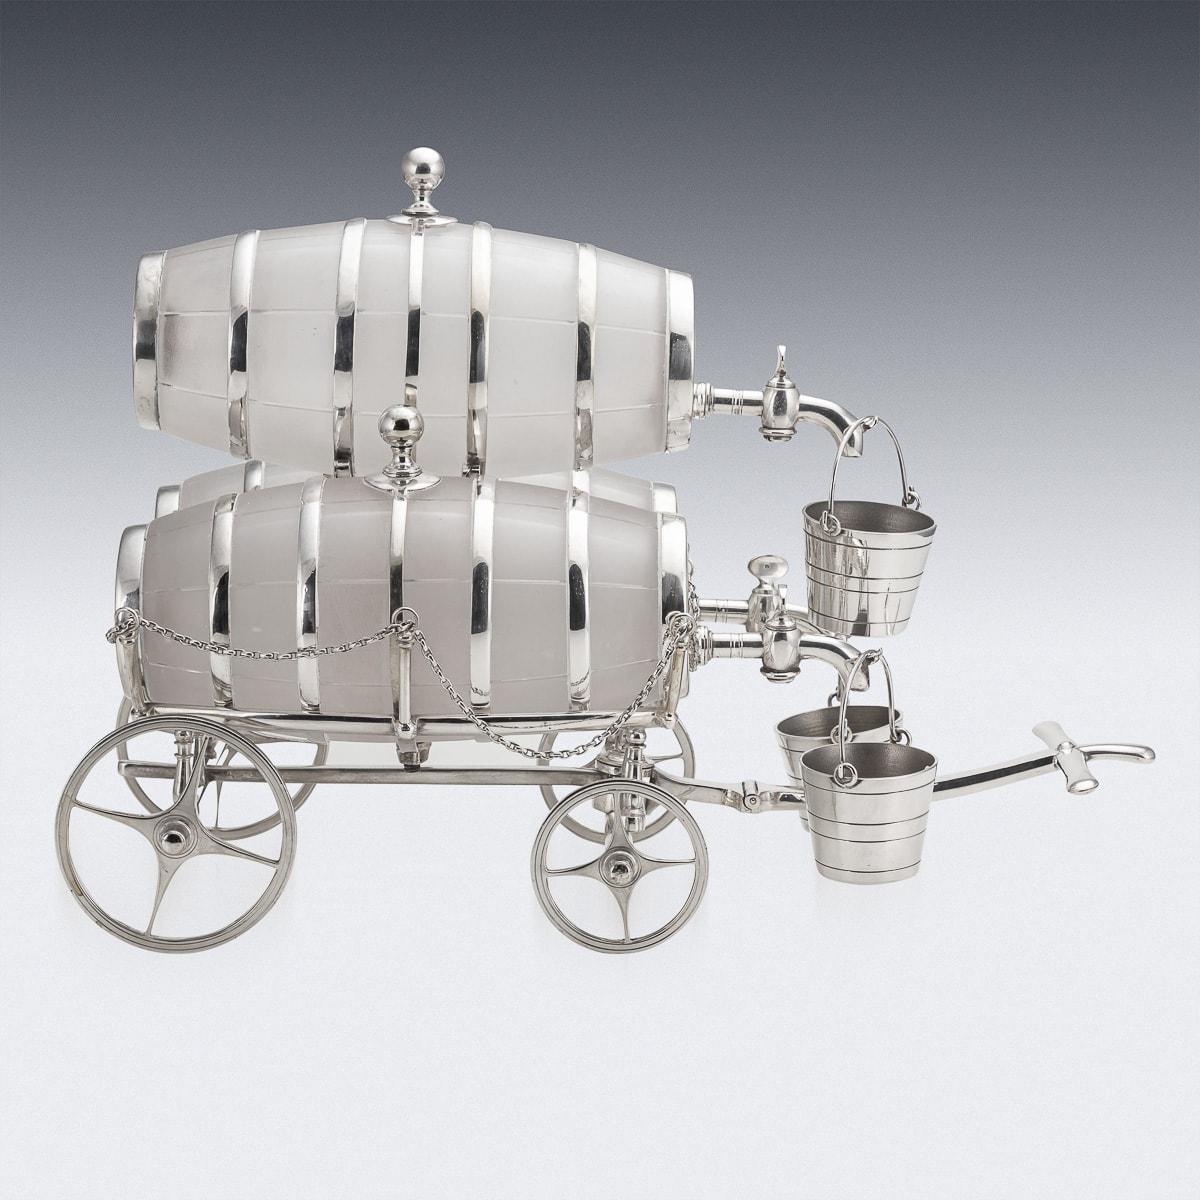 Antique 19th century Victorian silver plated & glass mounted spirit barrel cart, manufactured around the 1880s to store and serve fine spirits. The carts wheels are functional, allowing the entire dinner table to be able to enjoy a tipple after a